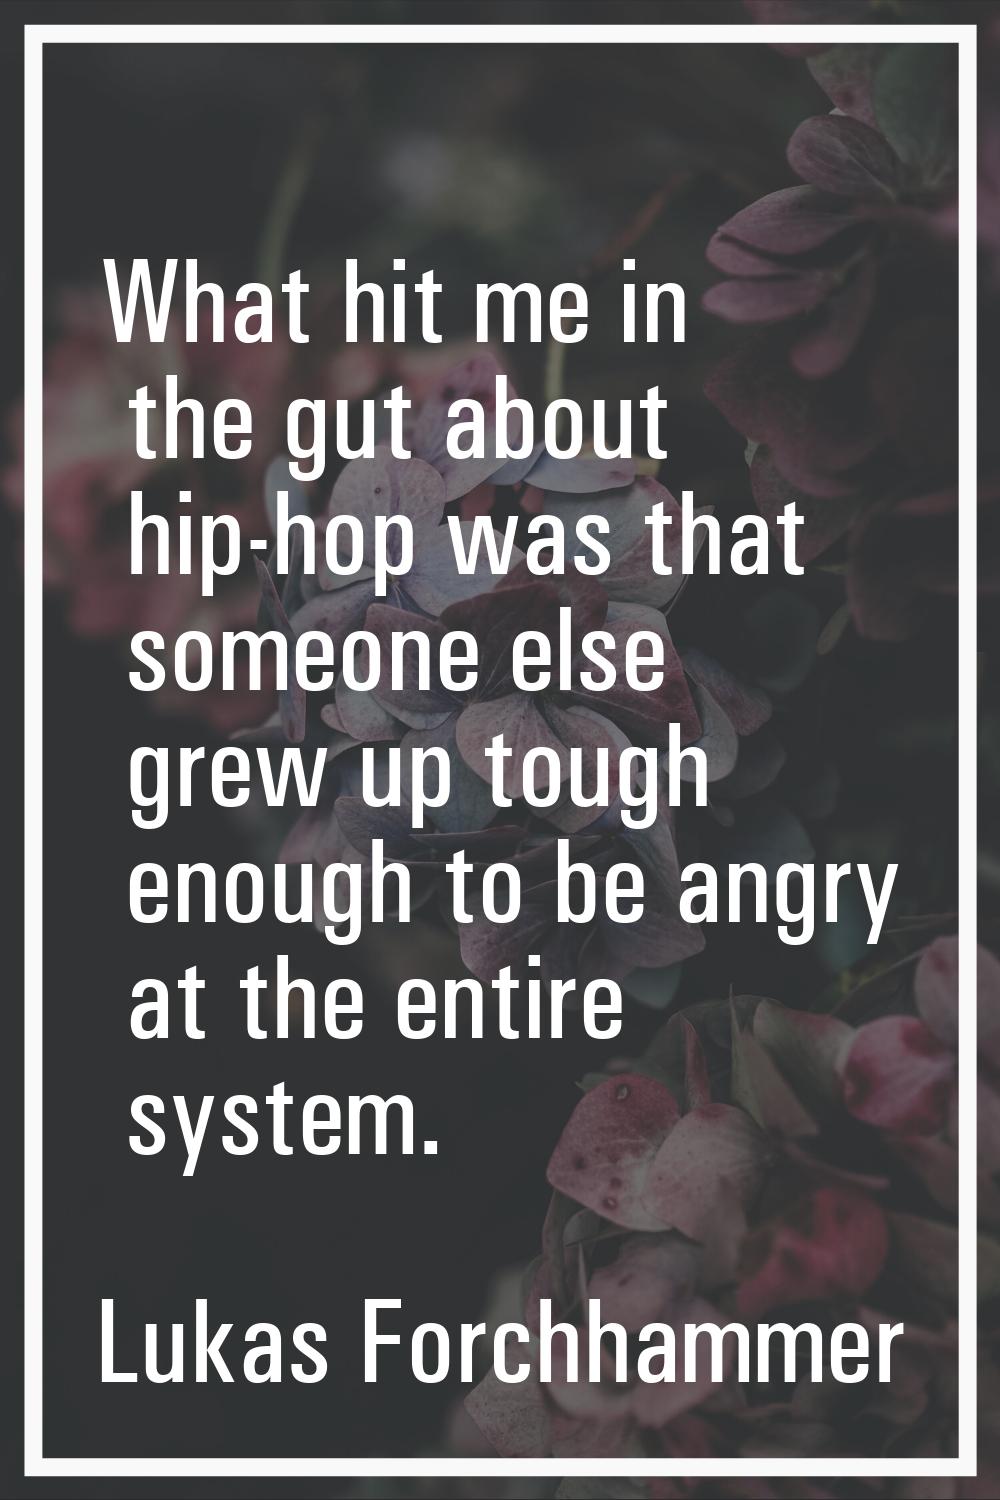 What hit me in the gut about hip-hop was that someone else grew up tough enough to be angry at the 